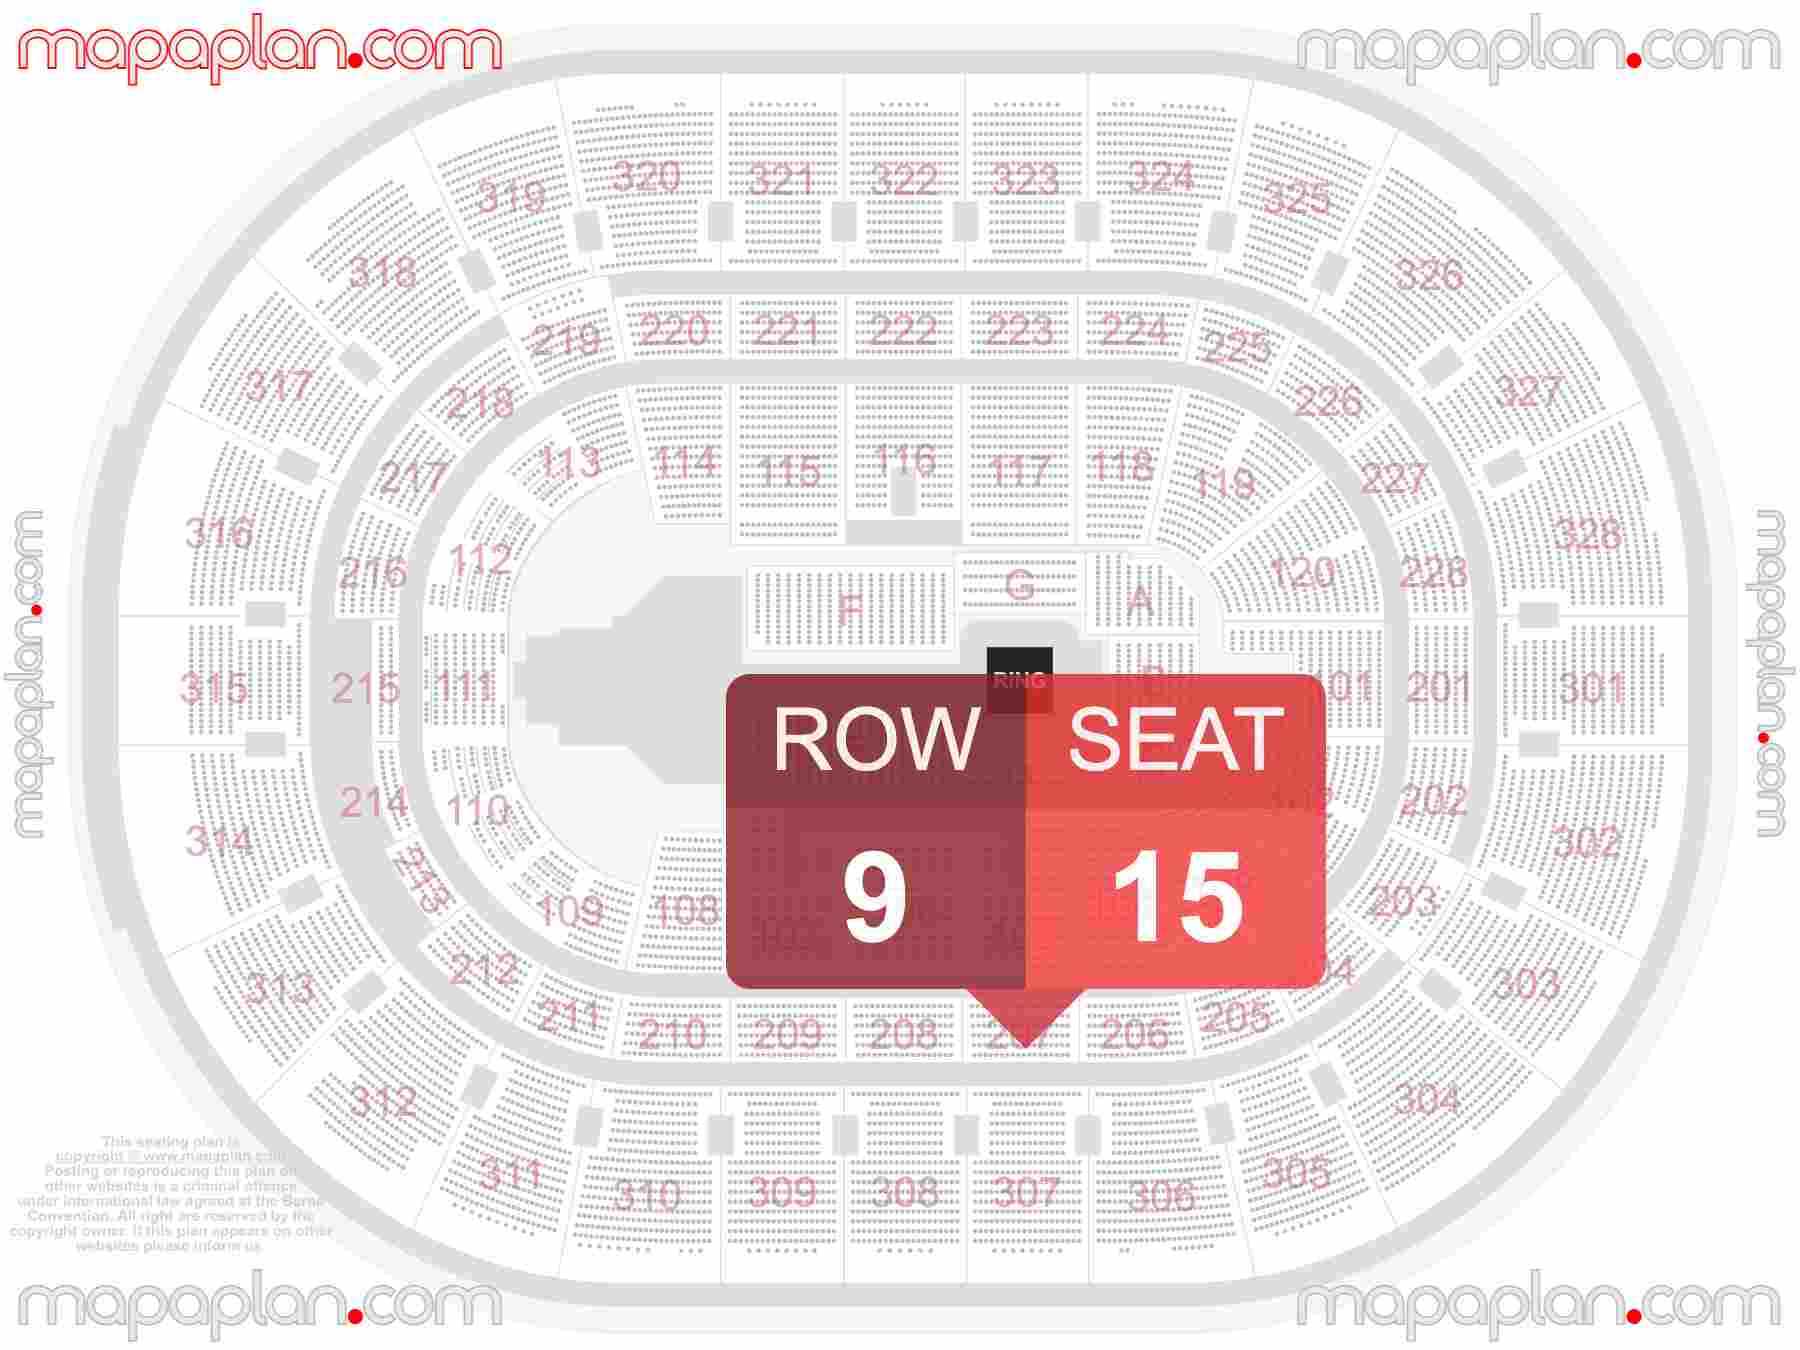 Ottawa Canadian Tire Centre seating map  WWE wrestling & boxing detailed seating map - 3d virtual seat numbers and row layout